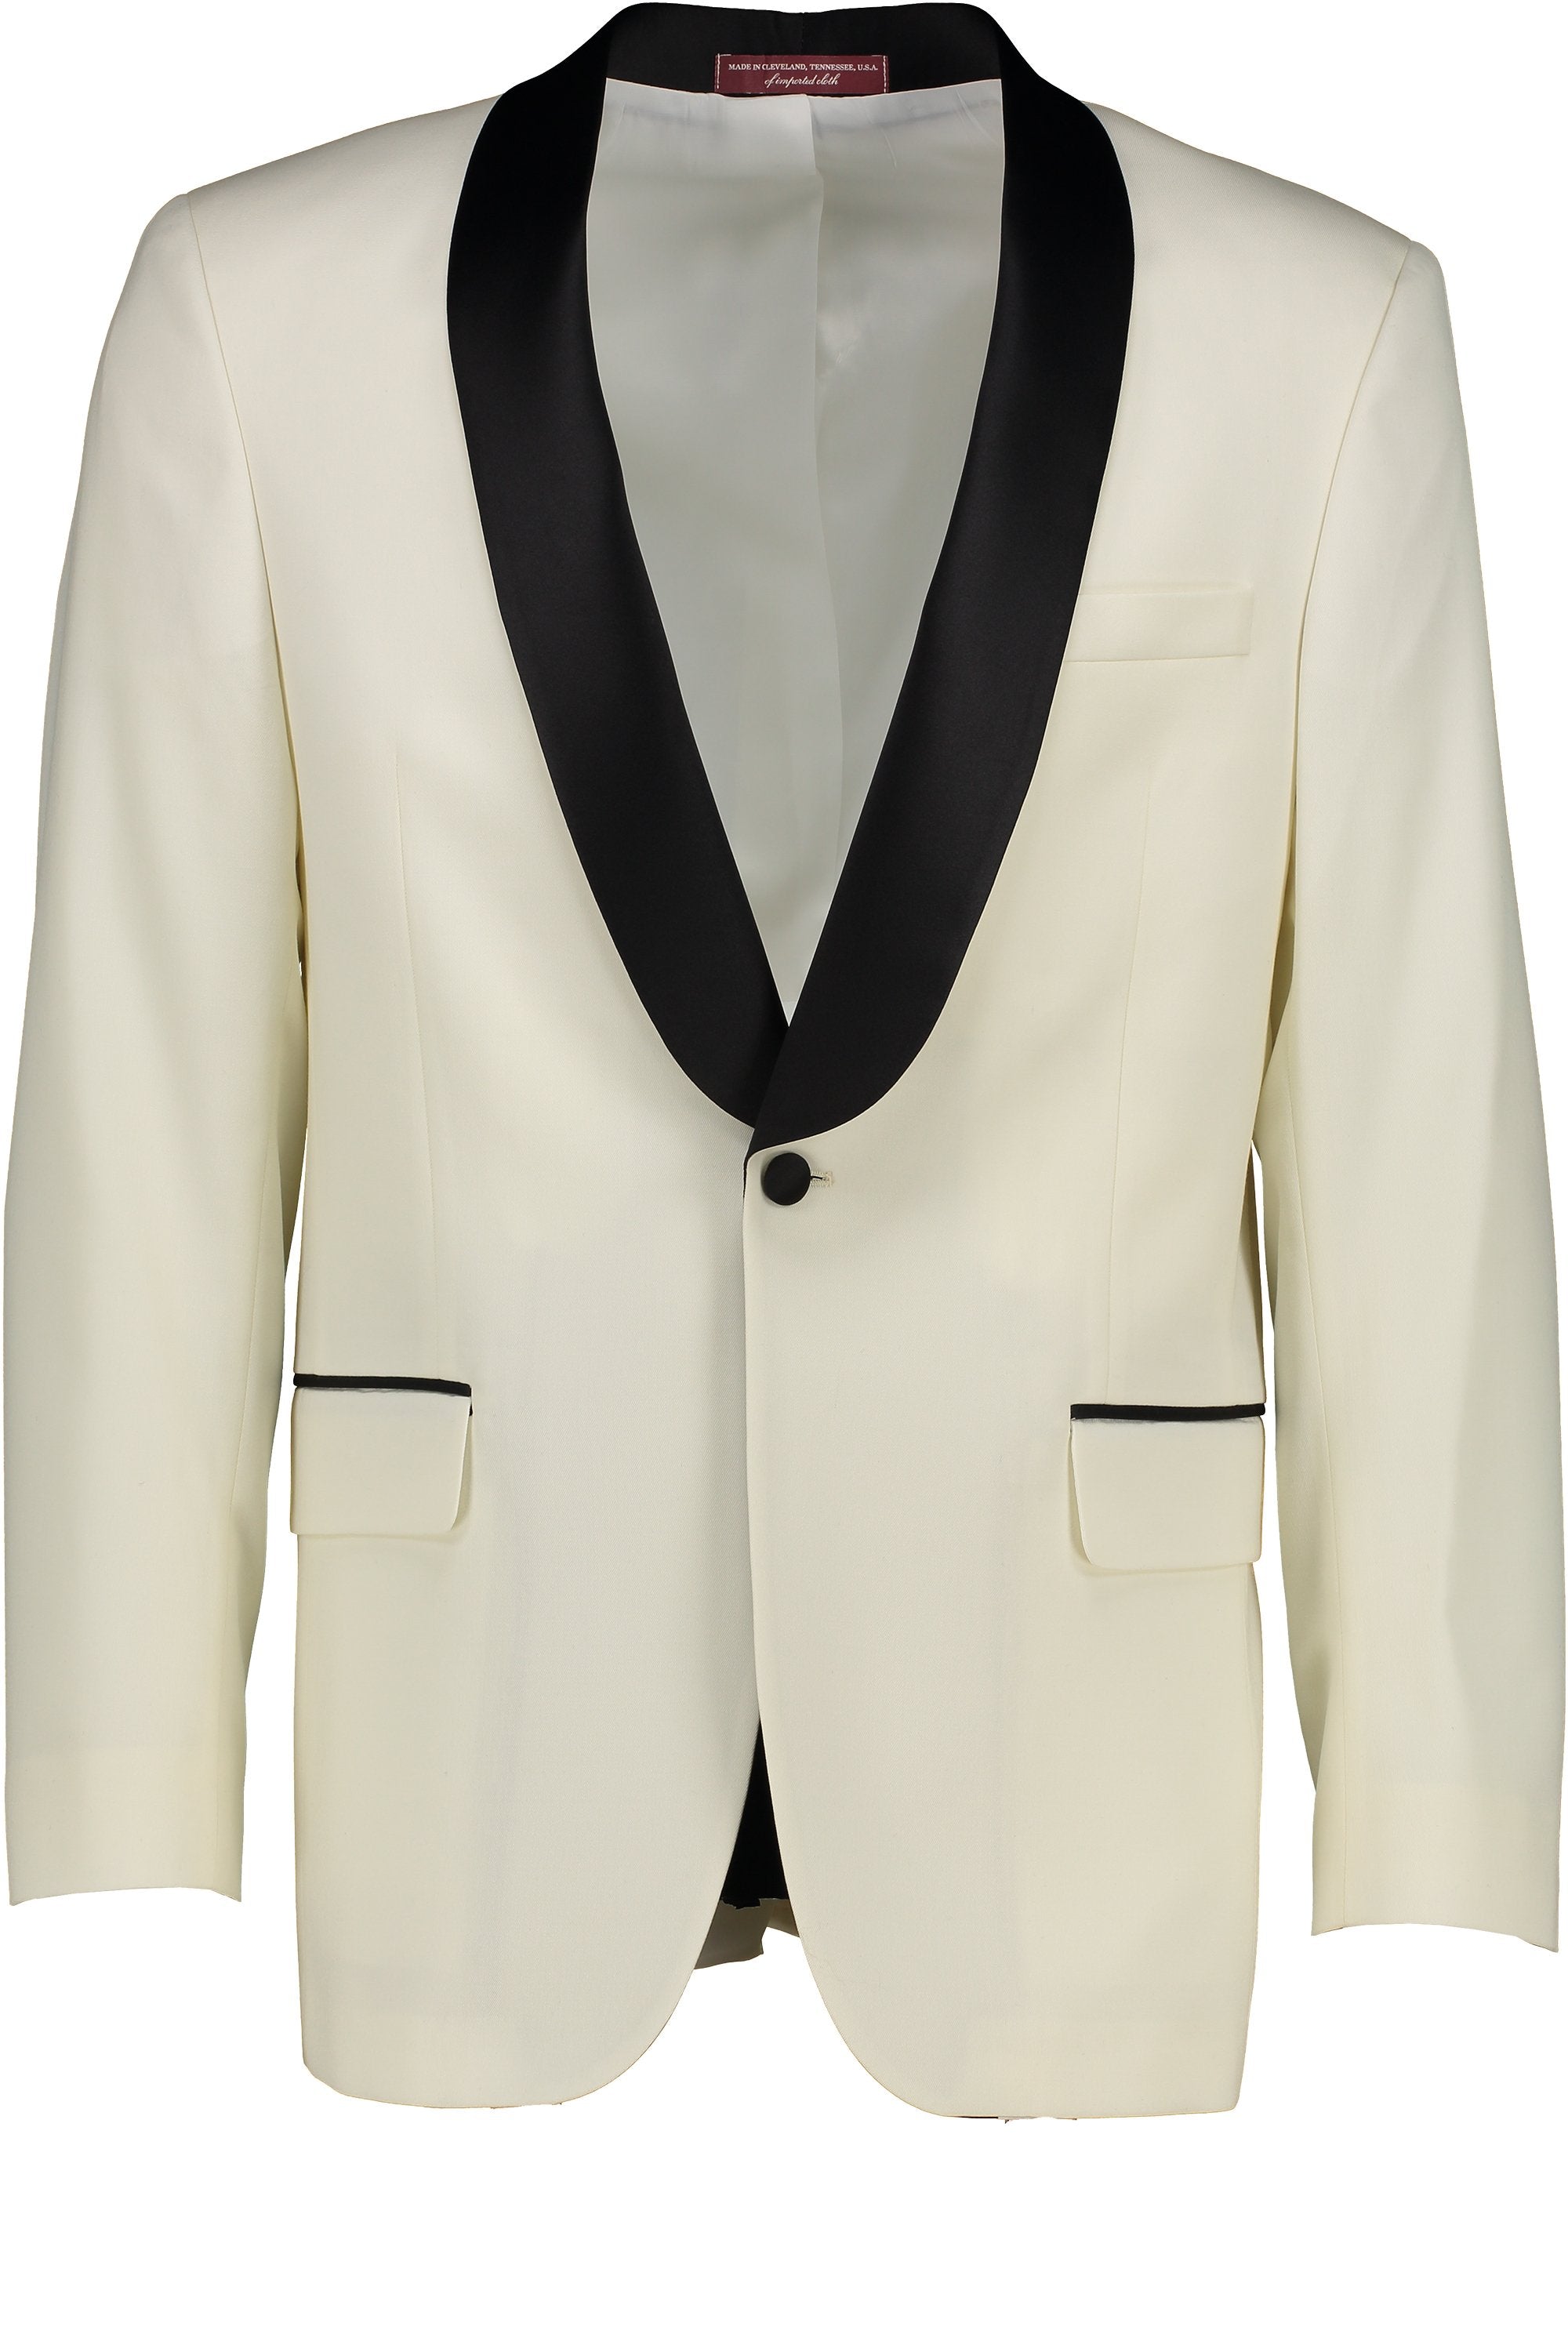 Classic Fit Ivory Wool Dinner Jacket with Black Satin Shawl Collar